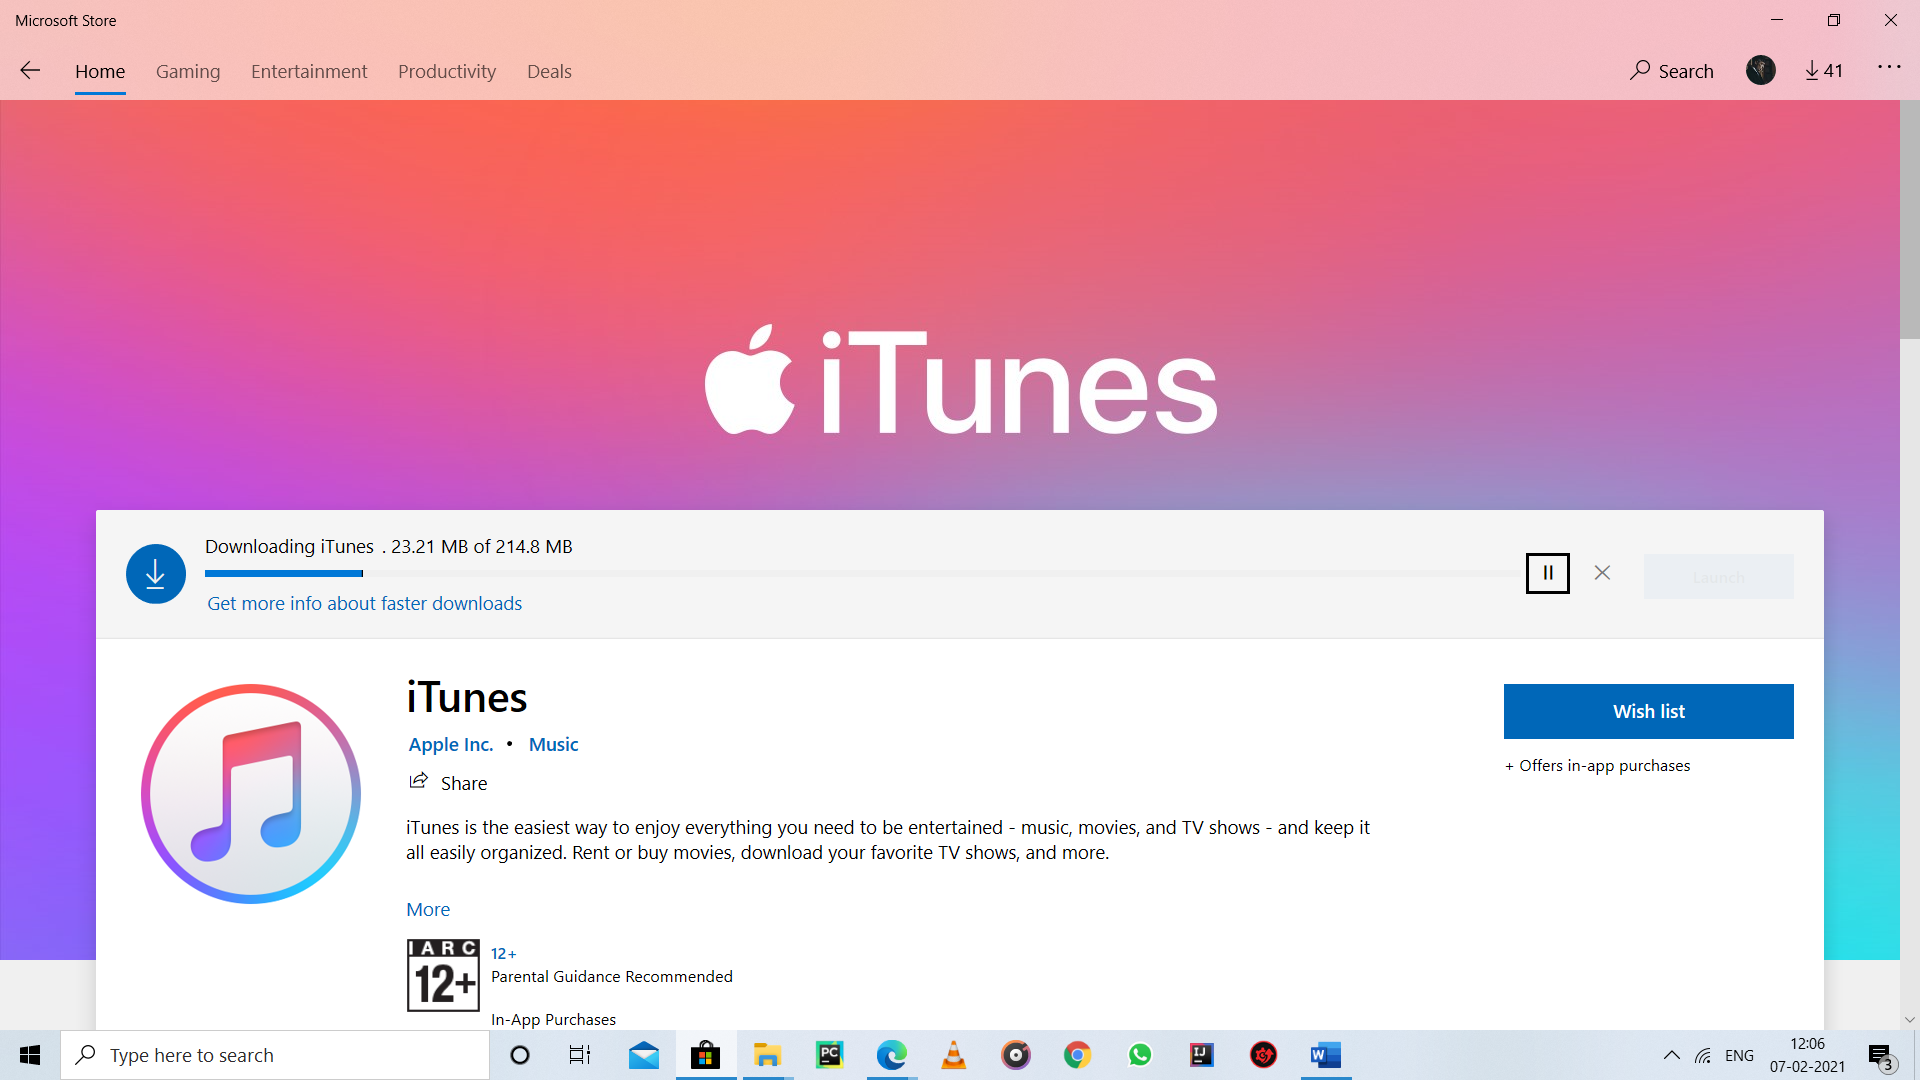 itunes for windows 10 home